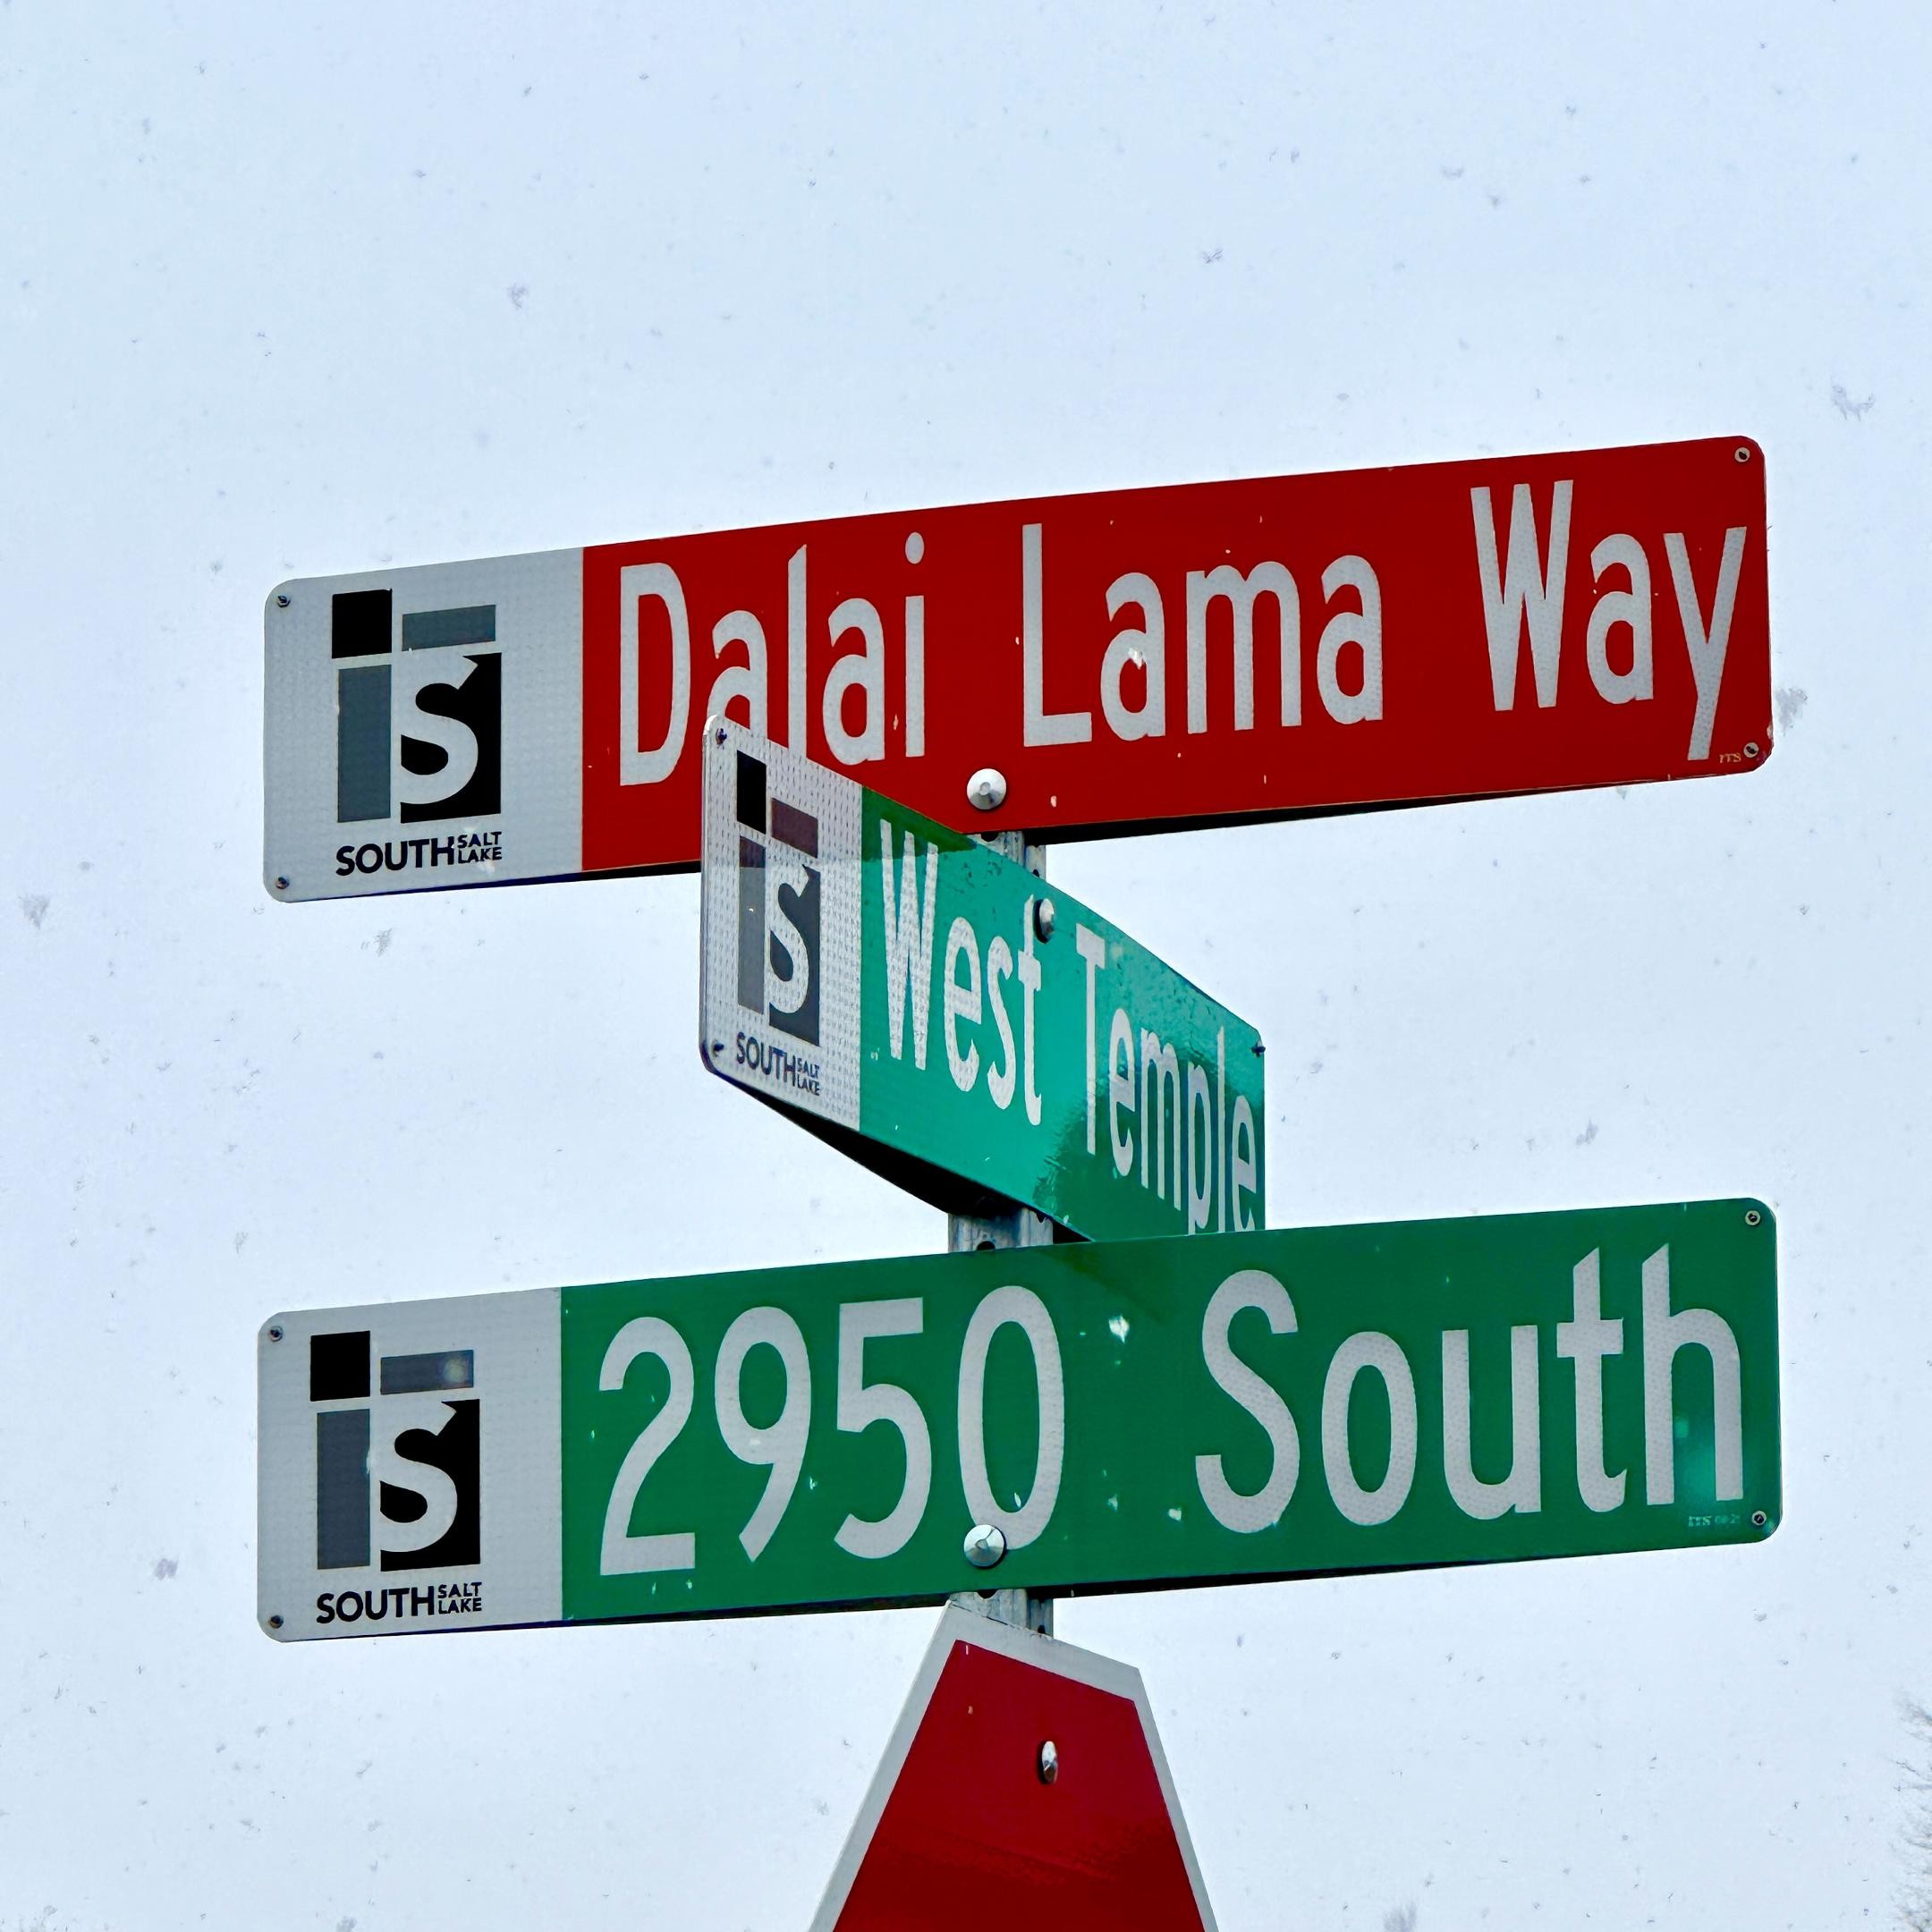 A street in South Salt Lake City was recently re-named in honor of the Dalai Lama. - BRYANT HEATH